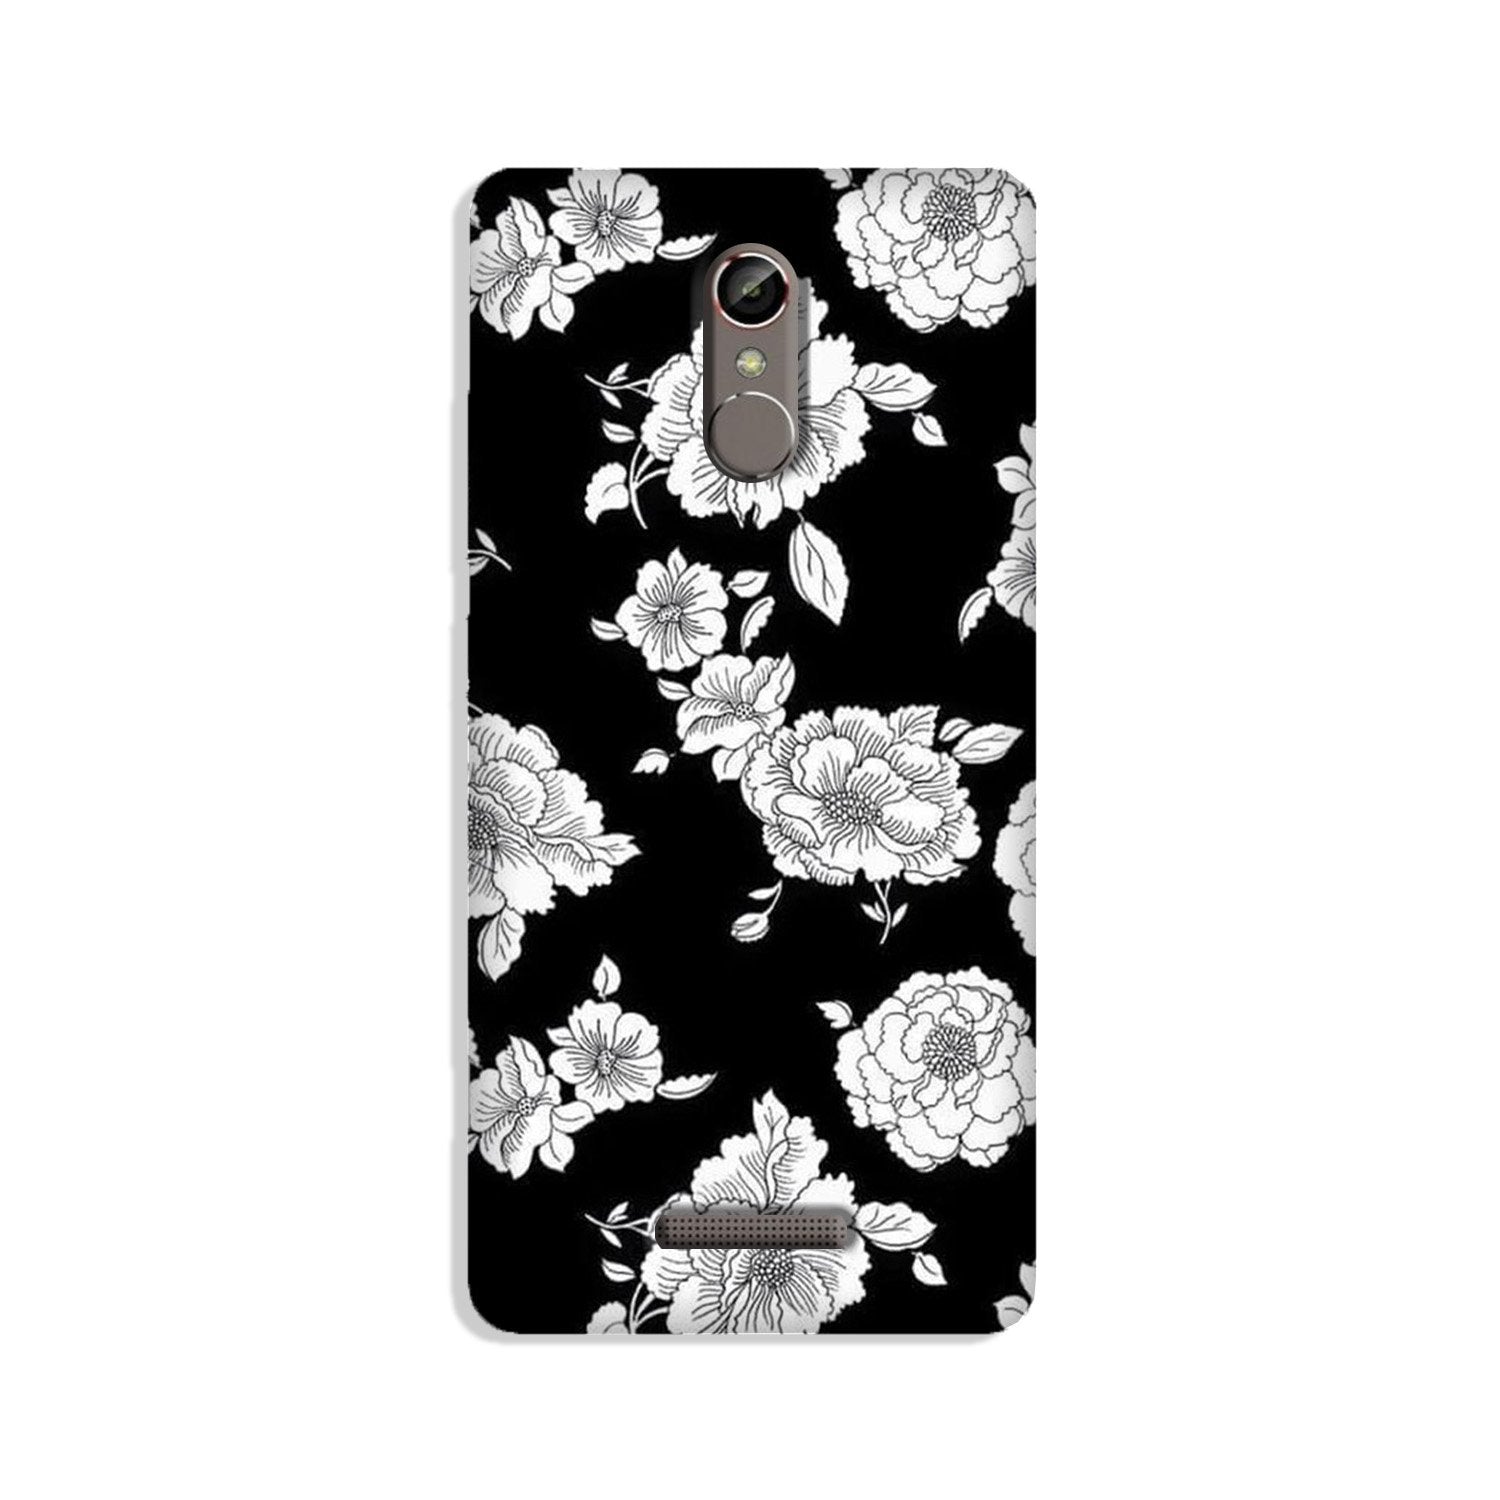 White flowers Black Background Case for Gionee S6s